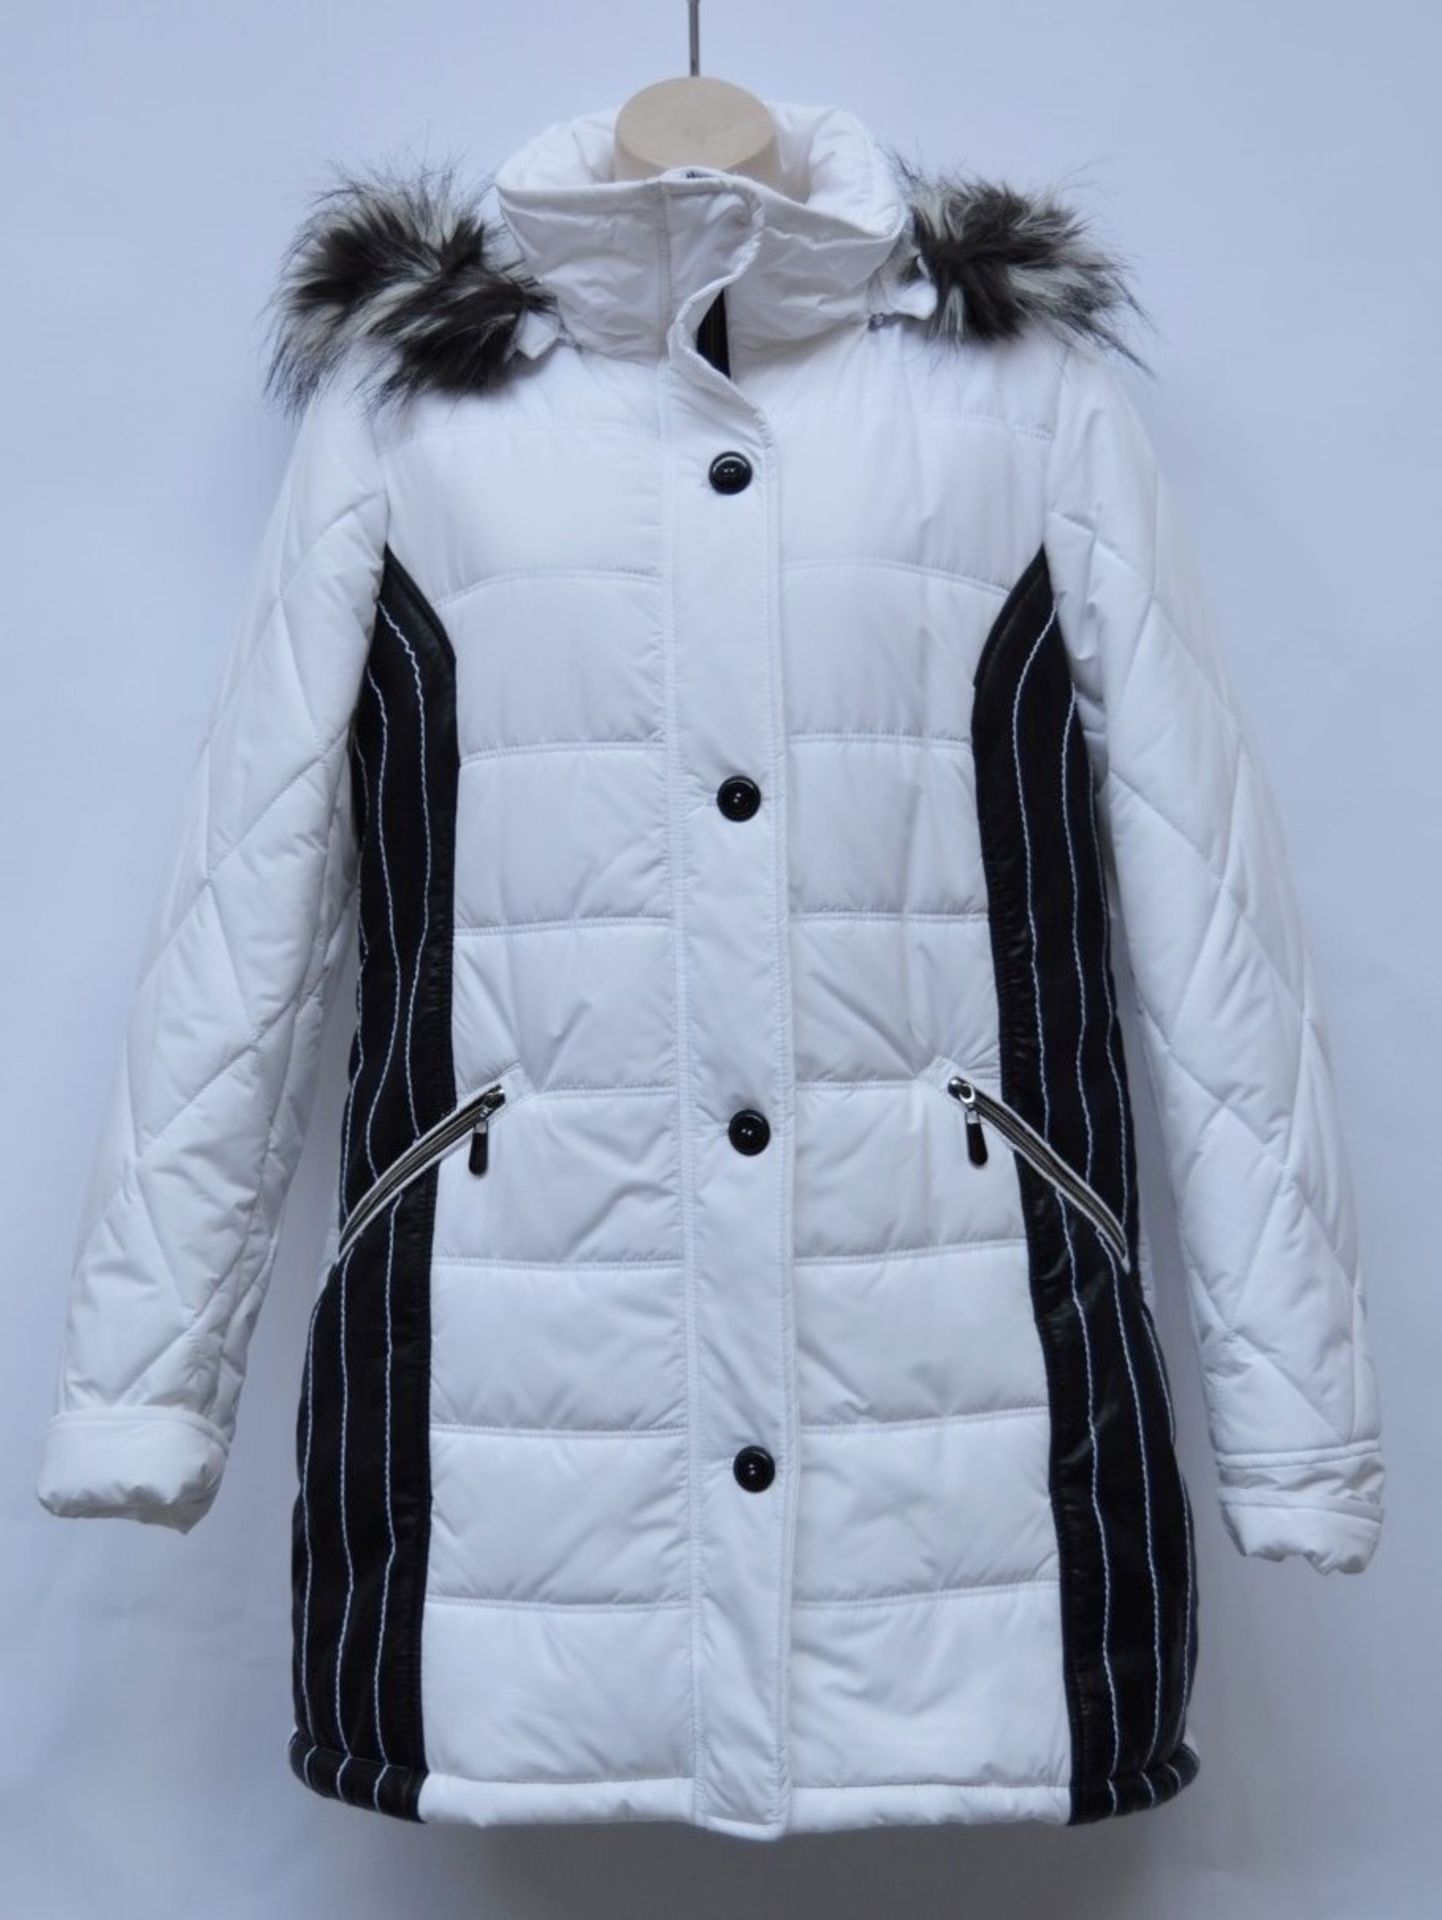 1 x Steilmann KSTN By Kirsten Womens Coat - Artic White Poly Filled Coat With Functional Pockets,